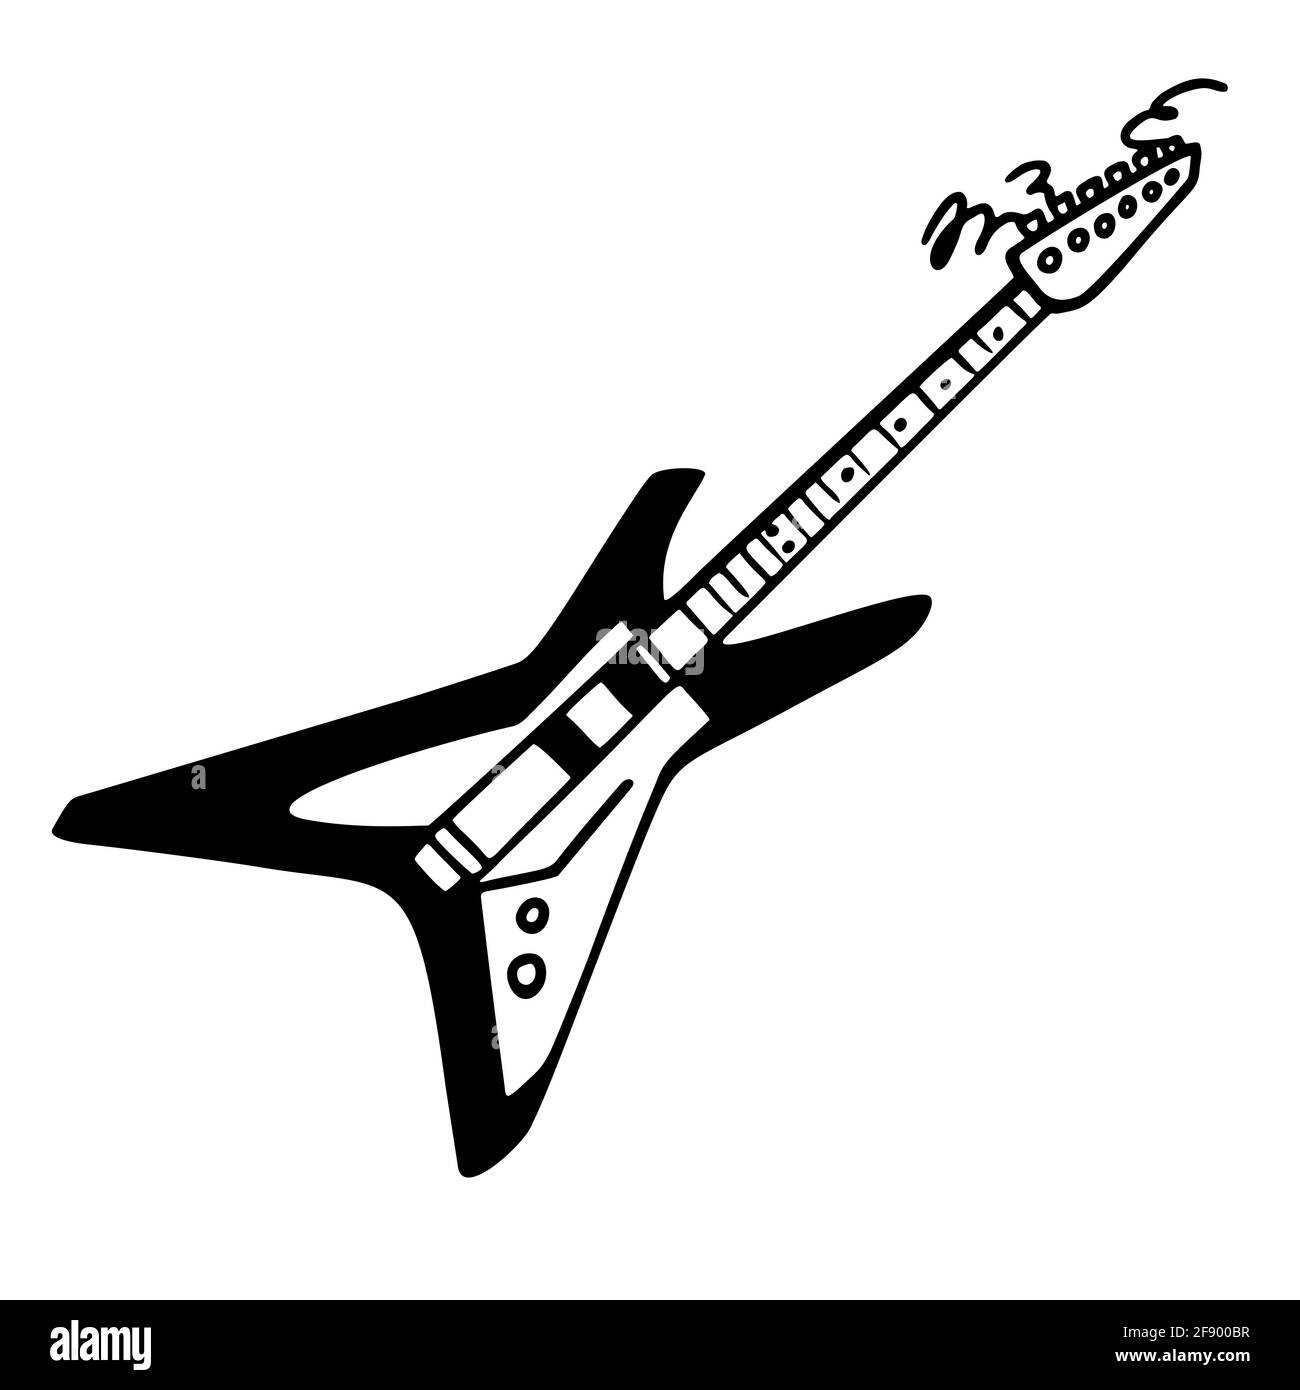 Punk rock collection. Electric guitar monochrome icon, star-shaped stealth rock guitar. Vector illustration on white background Stock Vector